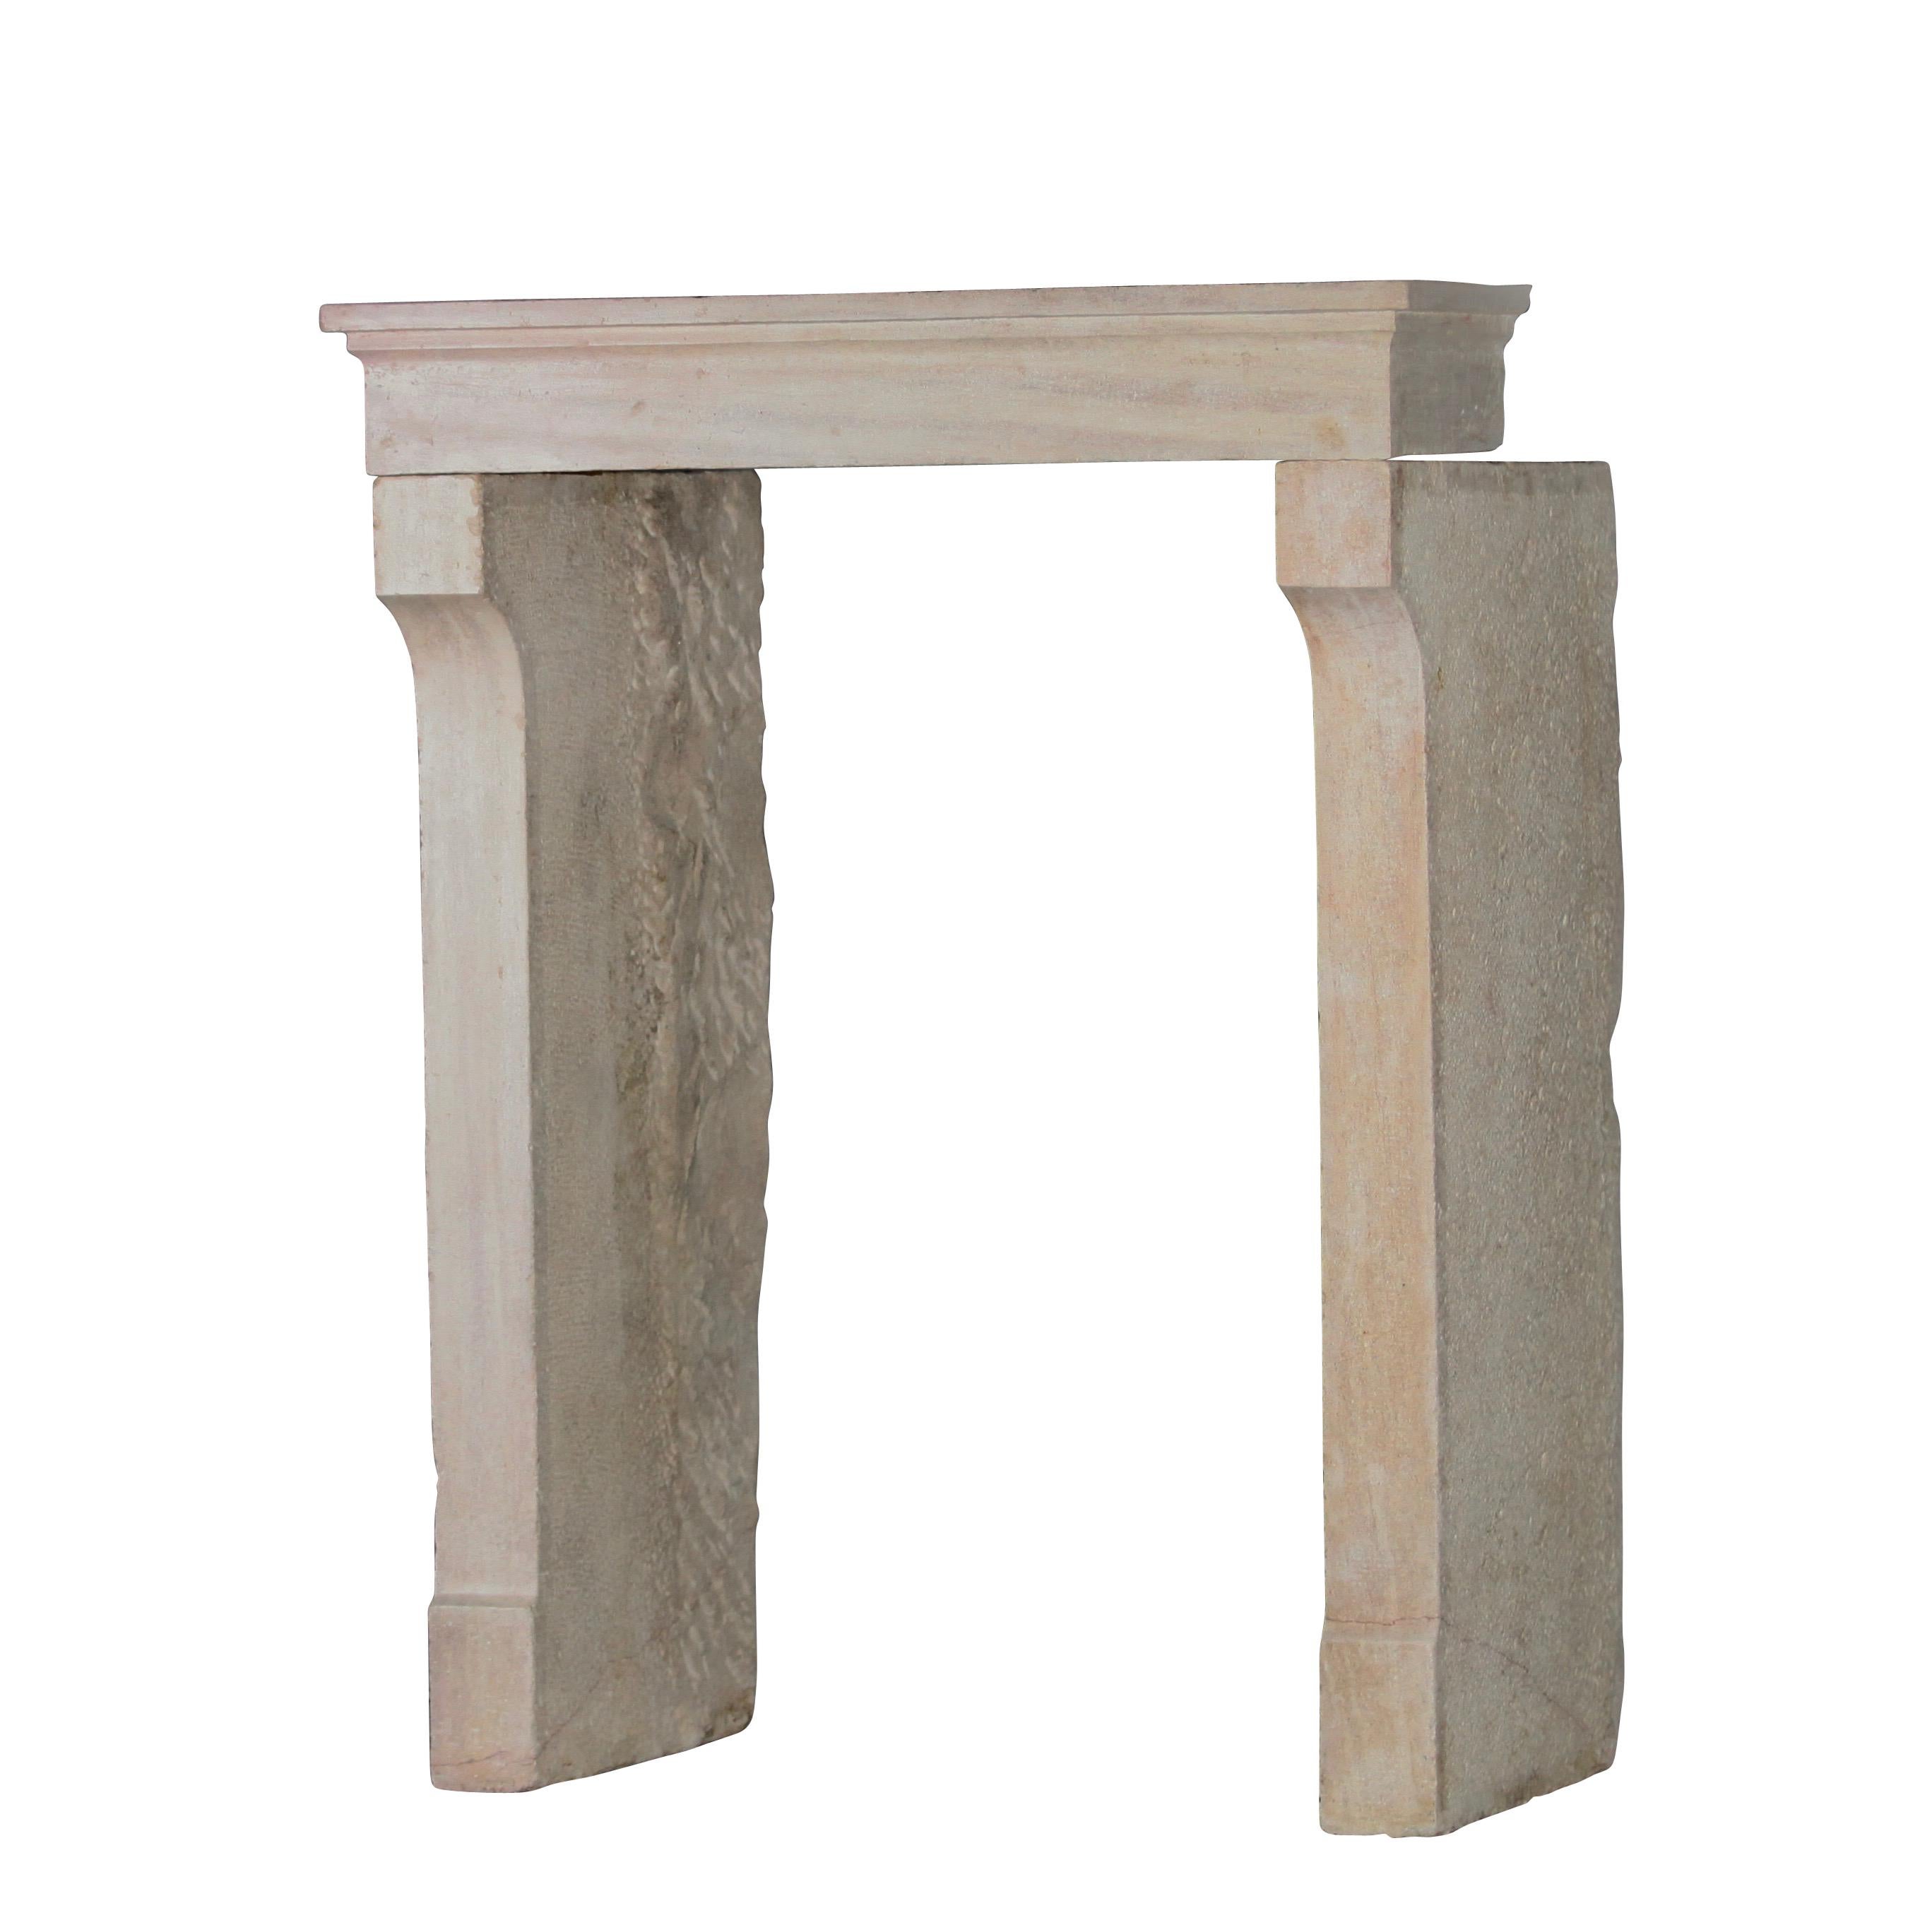 A unusual small original antique French country hard limestone LXIII style fireplace surround. Perfect for a small space.
Measures:
100 cm EW 39.37